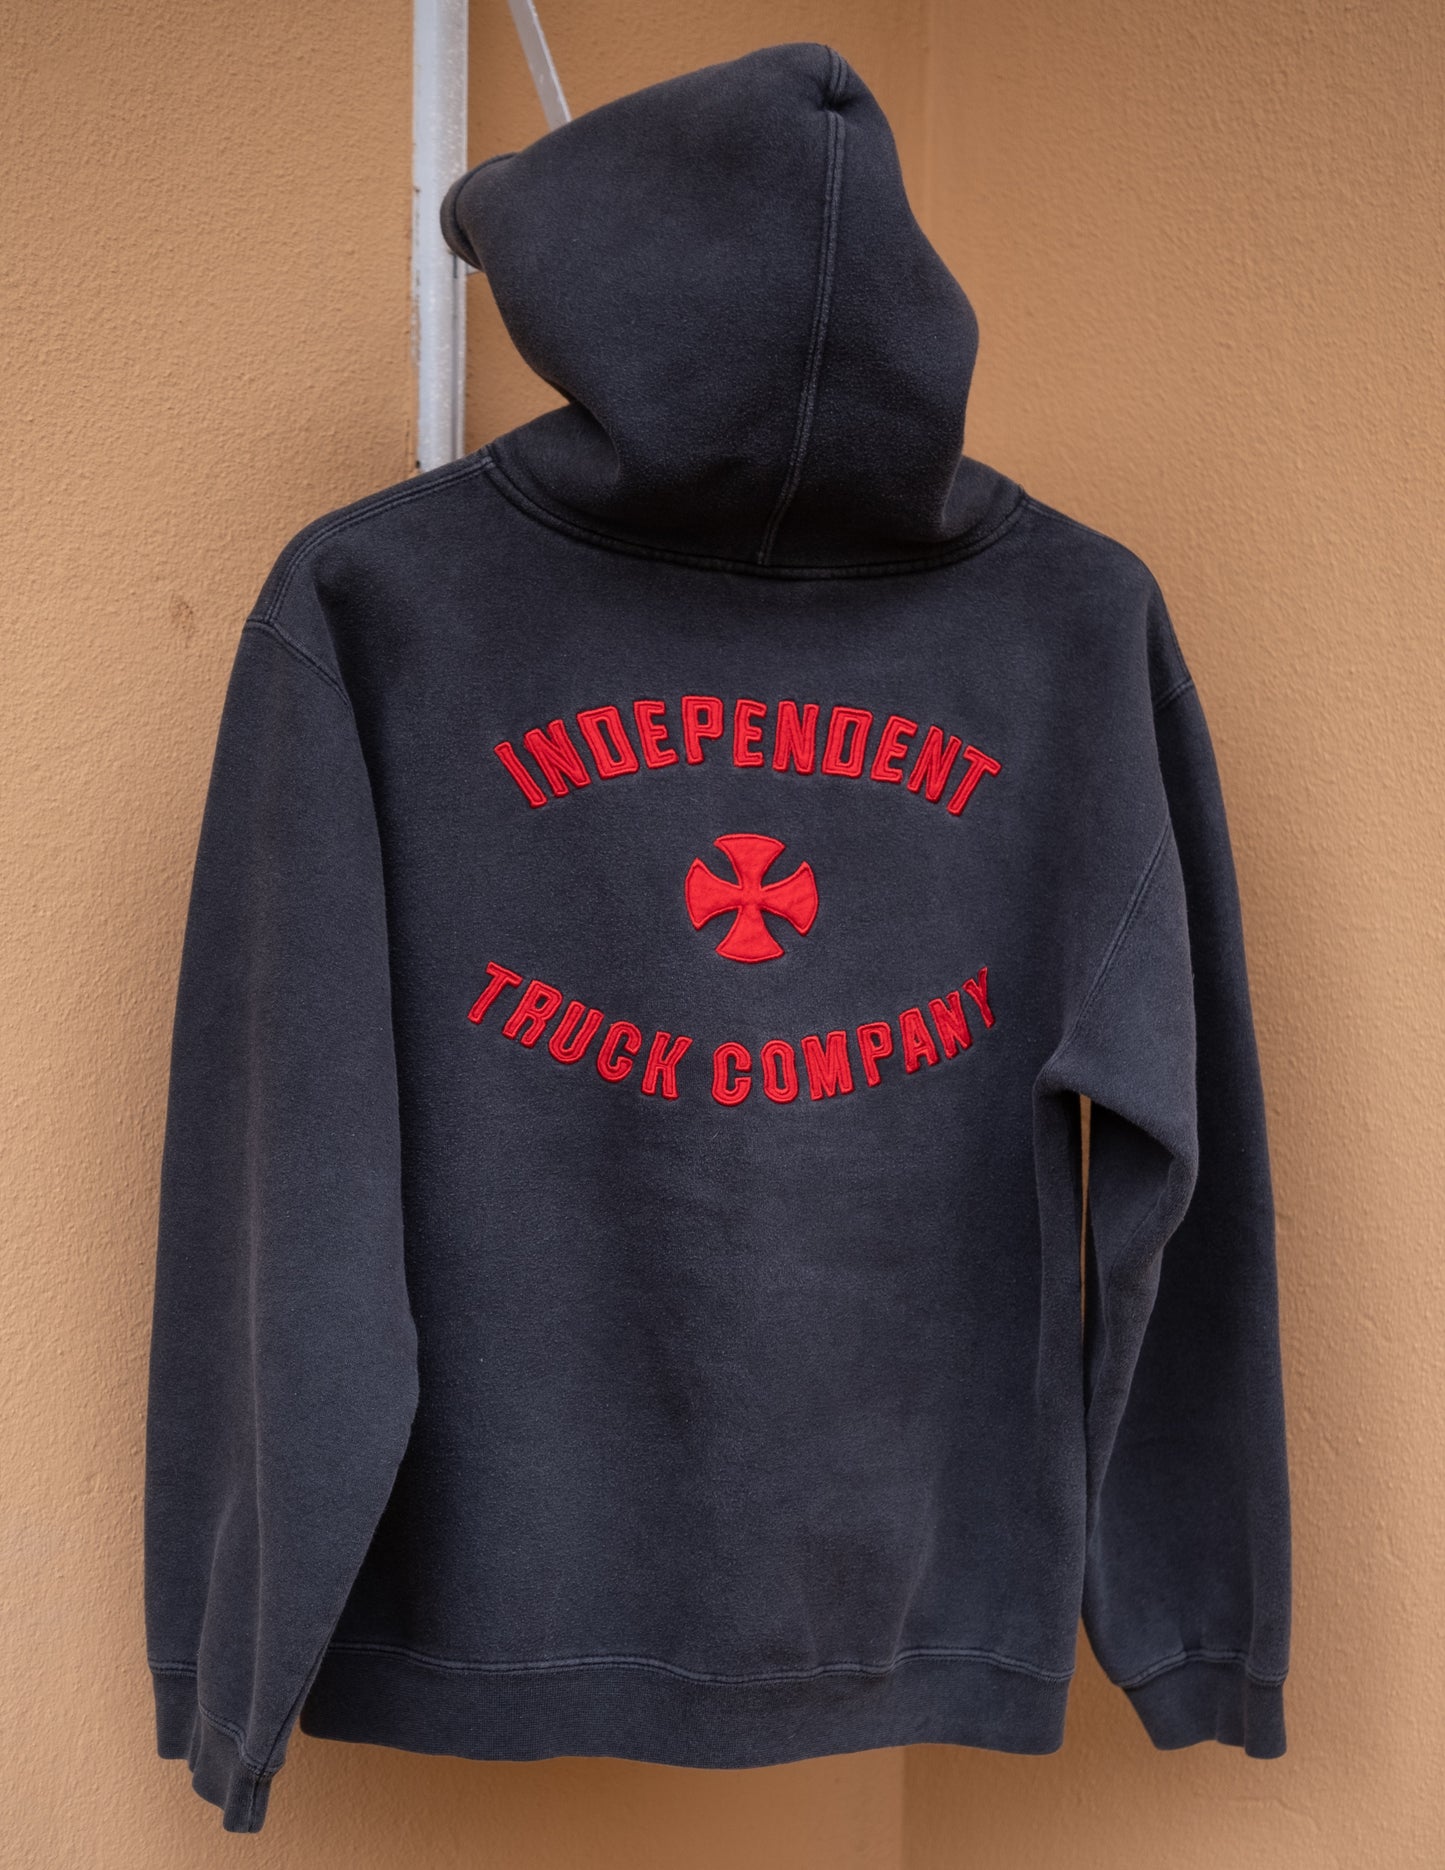 Independent Truck Company Vintage Hoodie Size M